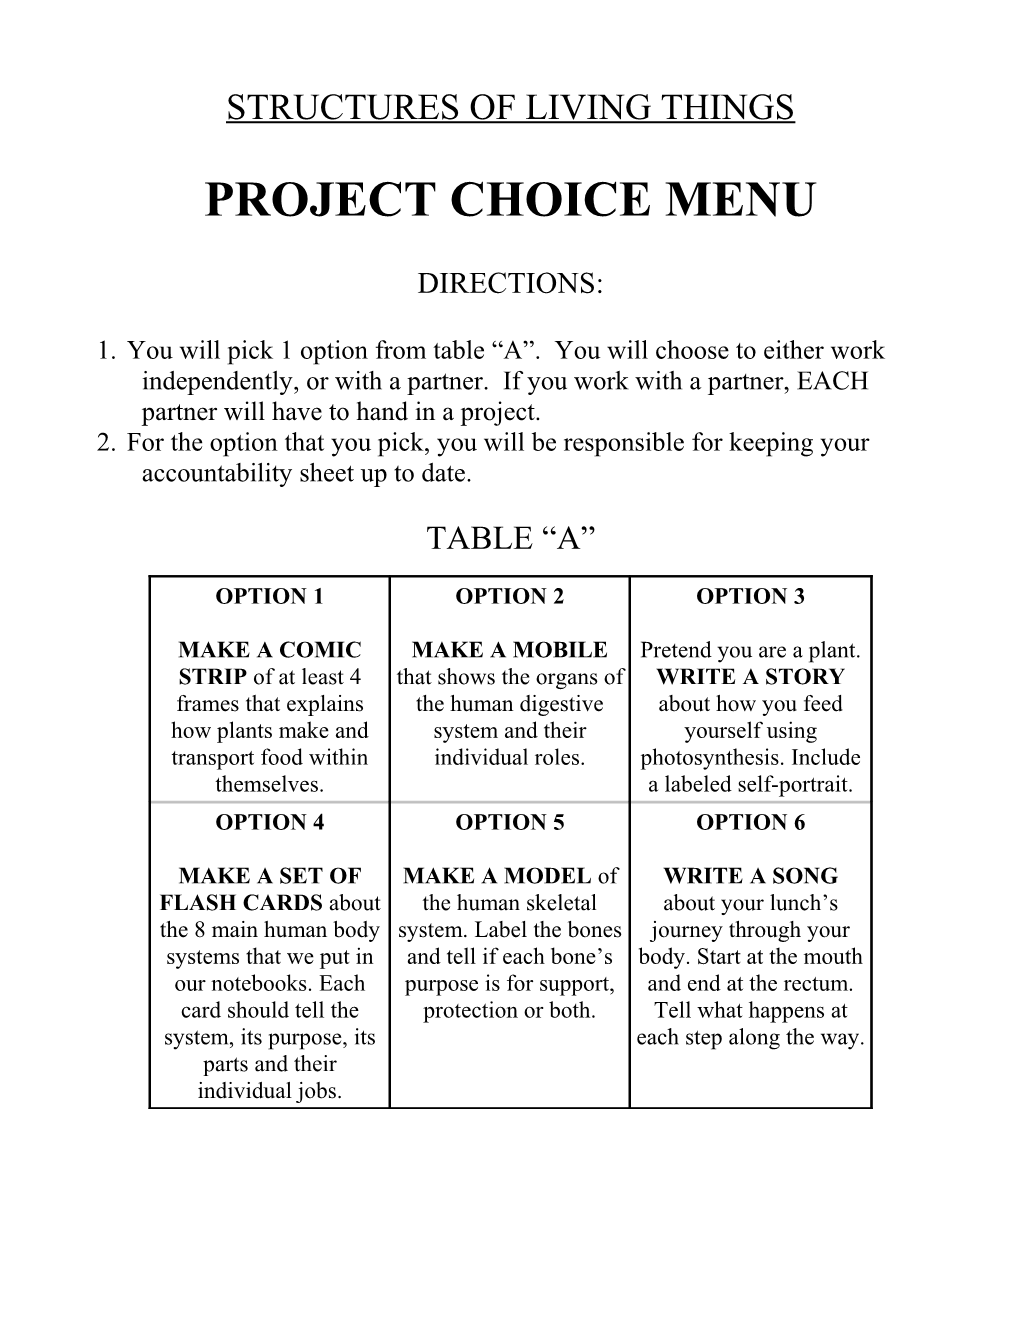 Structures of Living Things Project Choice Menu Directions